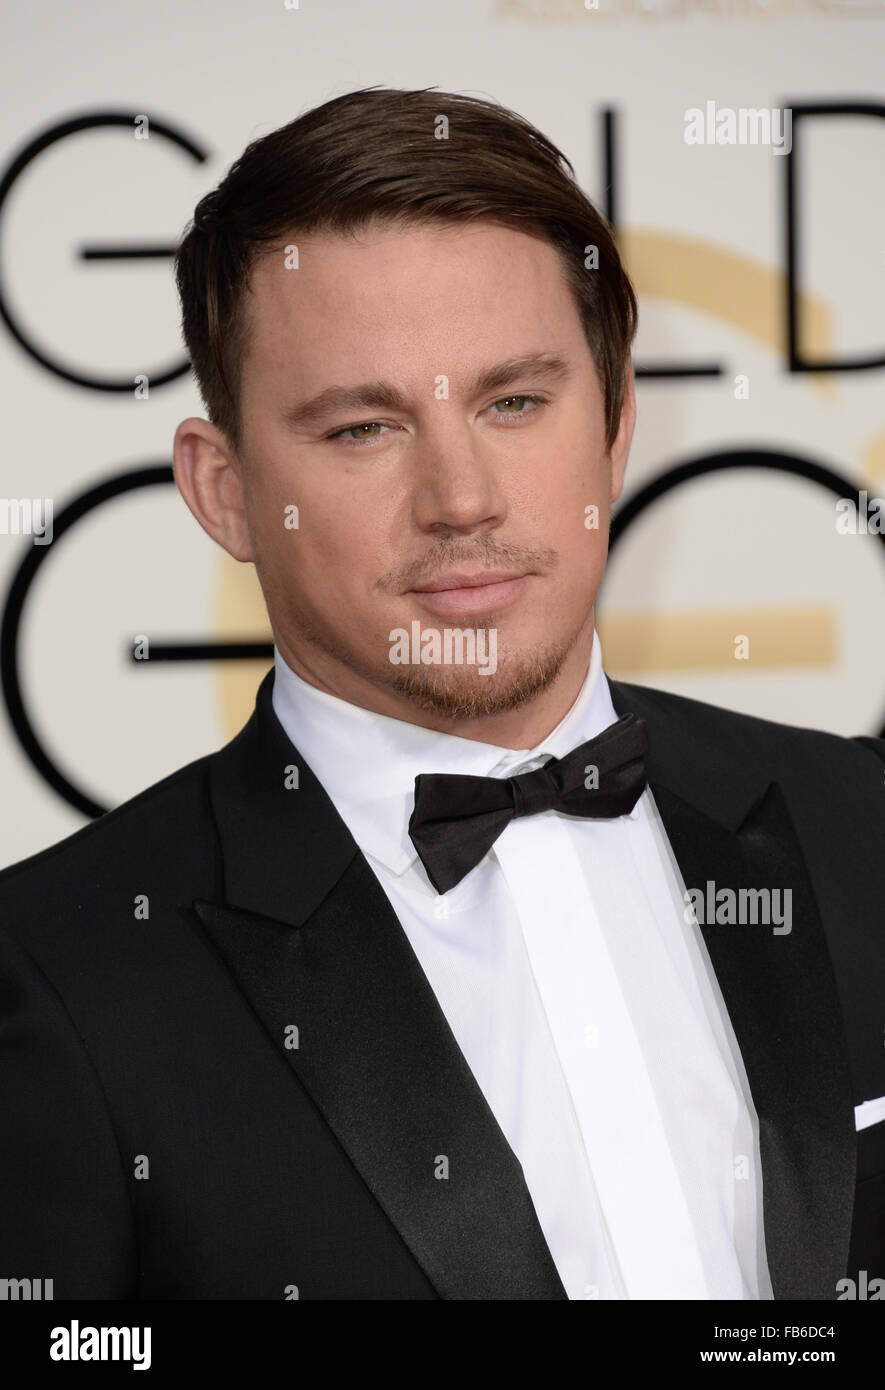 Los Angeles, California, USA. 10th January, 2016. Channing Tatum arrives at the Golden Globes, Los Angeles, CA Credit:  Sydney Alford/Alamy Live News Stock Photo